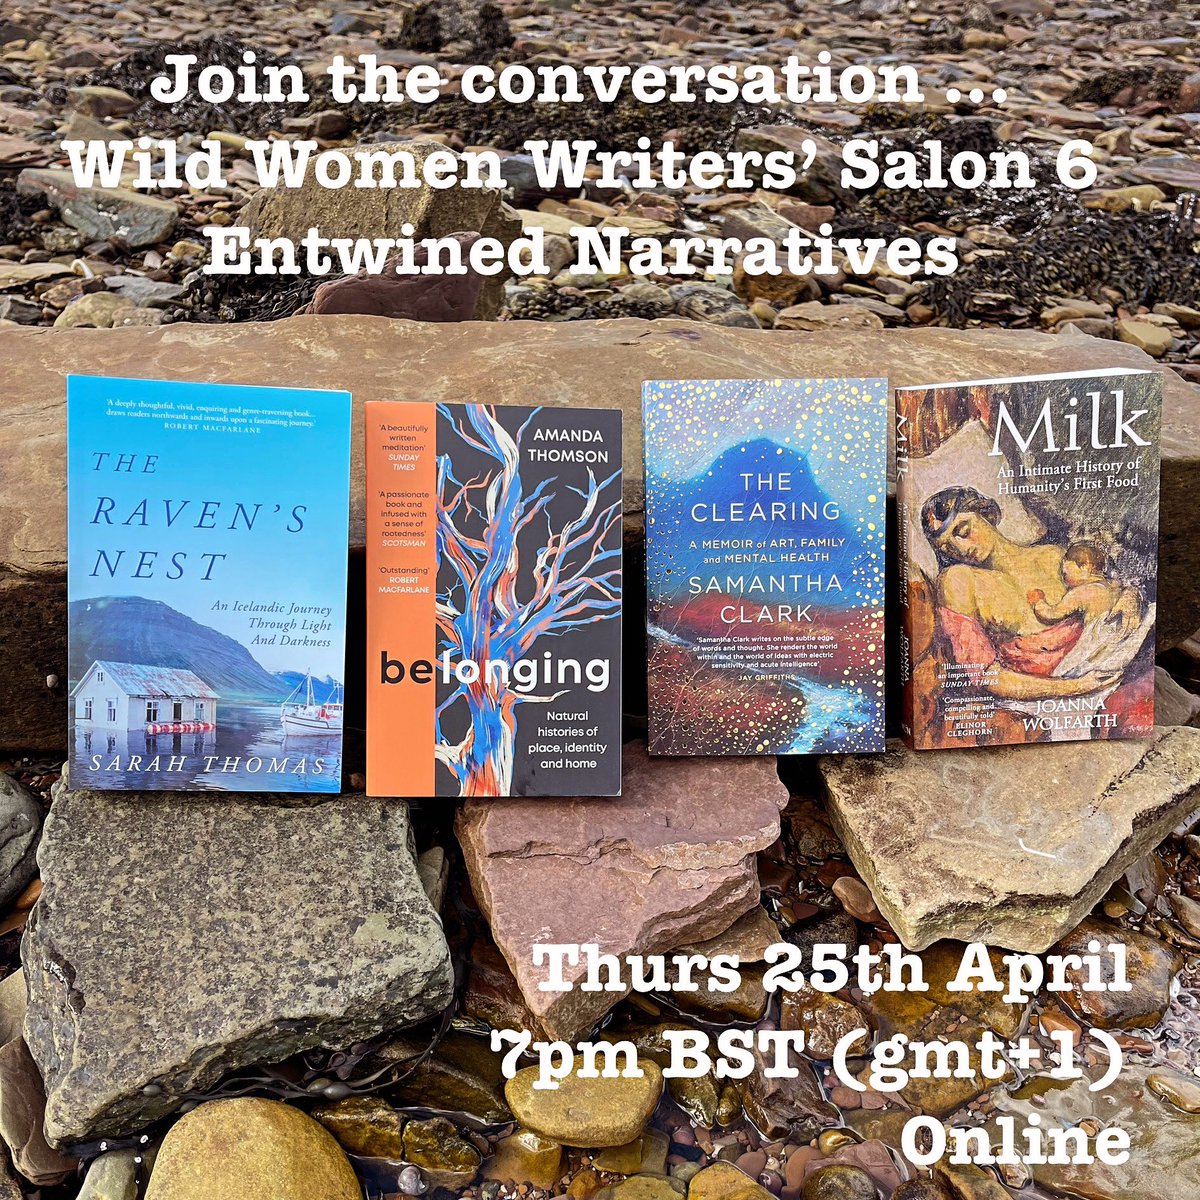 It’s today! A few tickets still available - Pay What You Can🌟 Join me & guest authors @journeysinbtwn @passingplace @sam_clark_art @JoannaWolfarth as we deep dive into the interplay of art & writing in creative practice. Online #memoir #inspiringwomen eventbrite.co.uk/e/wild-women-w…